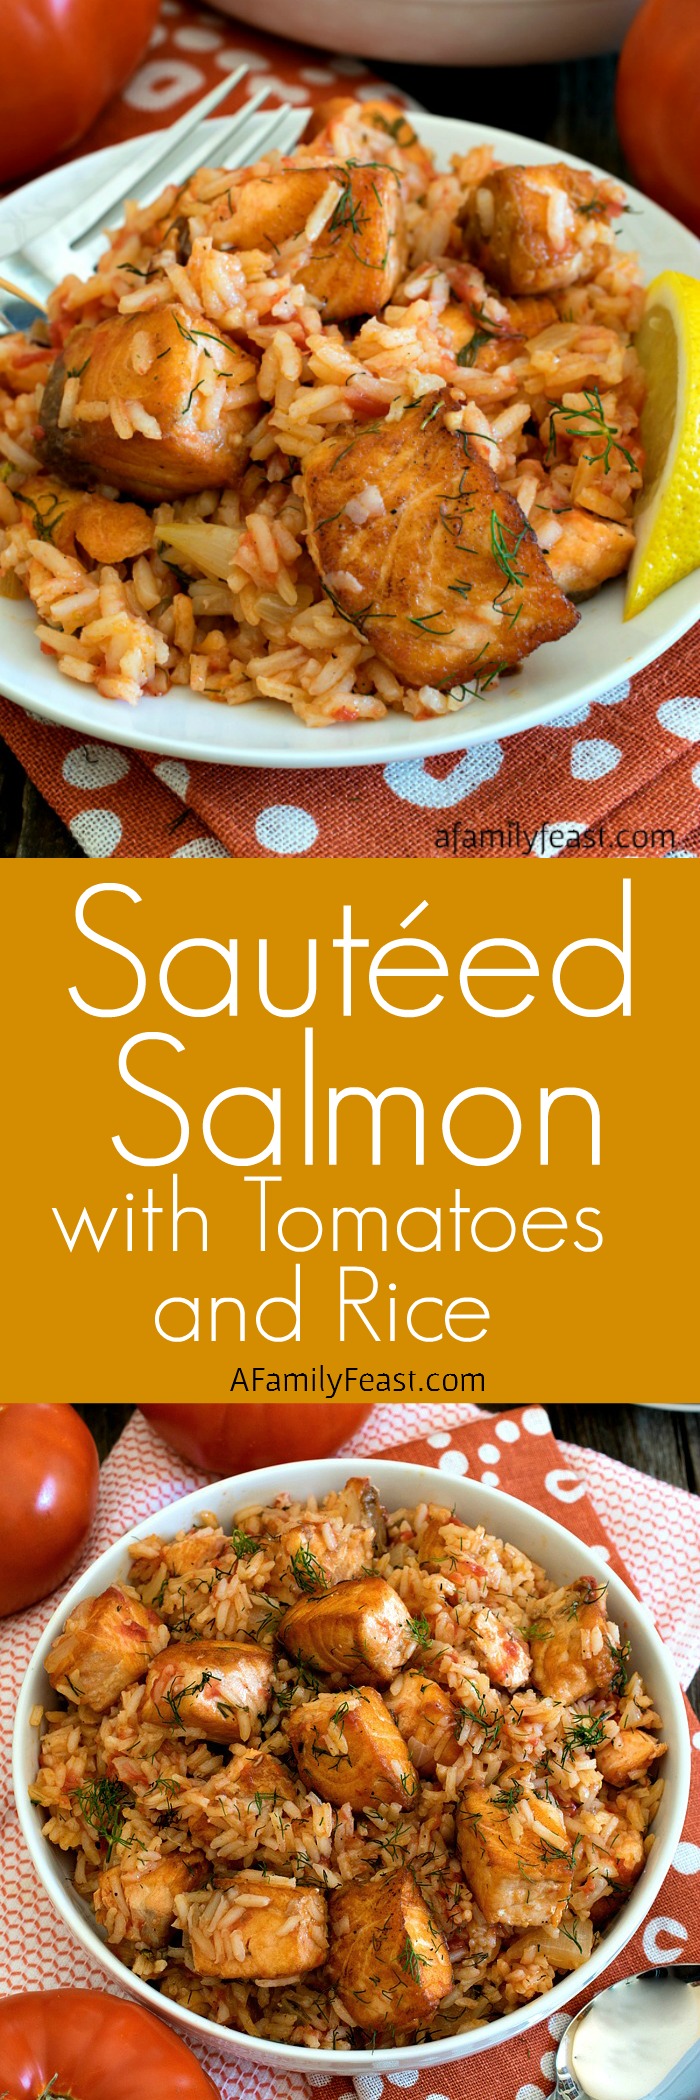 Sautéed Salmon with Rice and Tomatoes